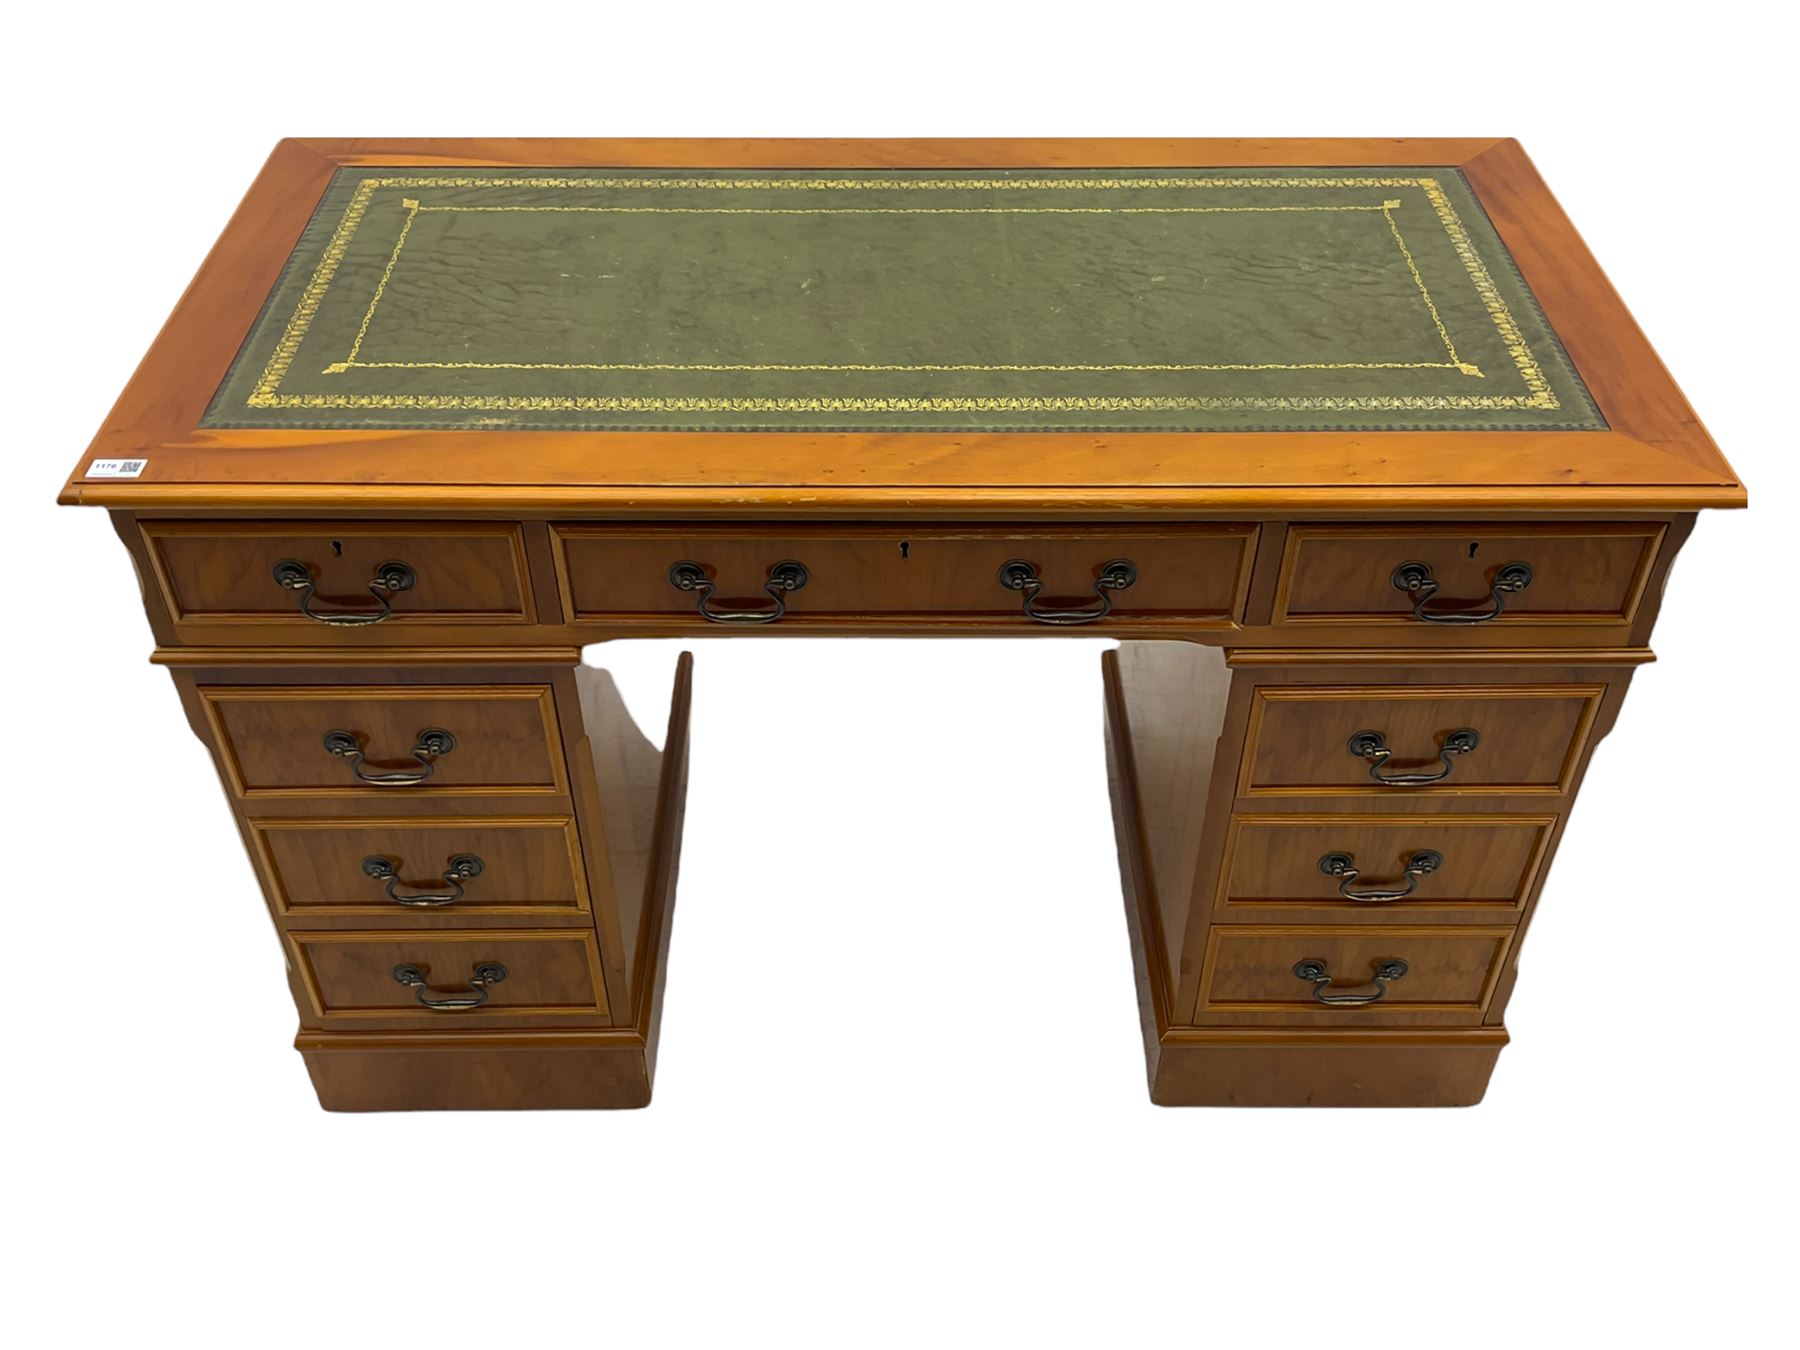 Yew wood twin pedestal office desk - Image 9 of 9